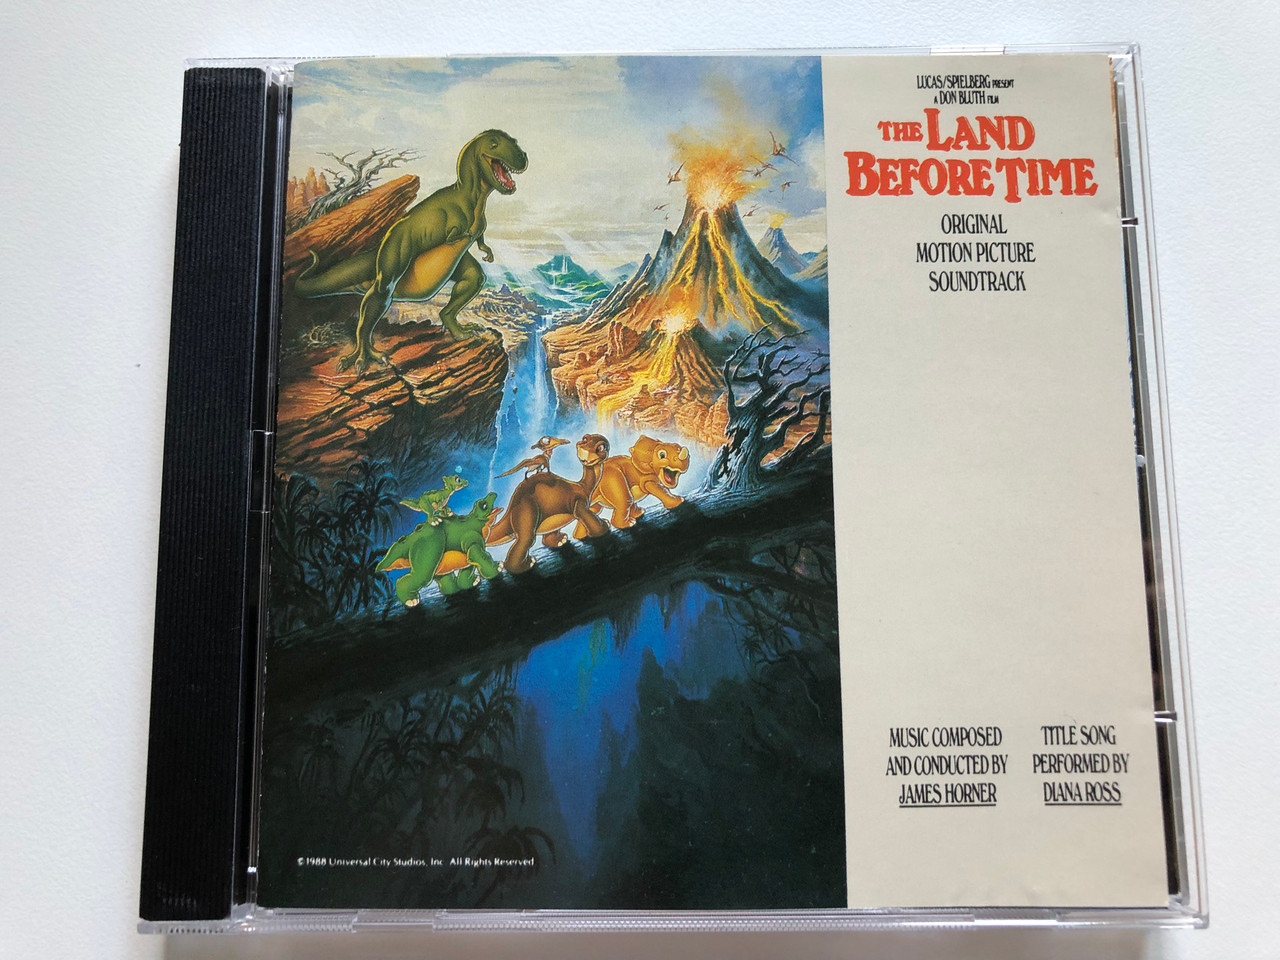 https://cdn10.bigcommerce.com/s-62bdpkt7pb/products/0/images/233762/LucasSpielberg_Present_a_Don_Bluth_Film_-_The_Land_Before_Time_Original_Motion_Picture_Soundtrack_-_Music_Composed_and_Conducted_by_James_Horner_Title_Song_Performed_By_Diana_Ross_MCA_Reco_1__23065.1655137514.1280.1280.JPG?c=2&_gl=1*a8xmv3*_ga*MjA2NTIxMjE2MC4xNTkwNTEyNTMy*_ga_WS2VZYPC6G*MTY1NTEyNzk0OS40MzIuMS4xNjU1MTM3Mjc4LjM3